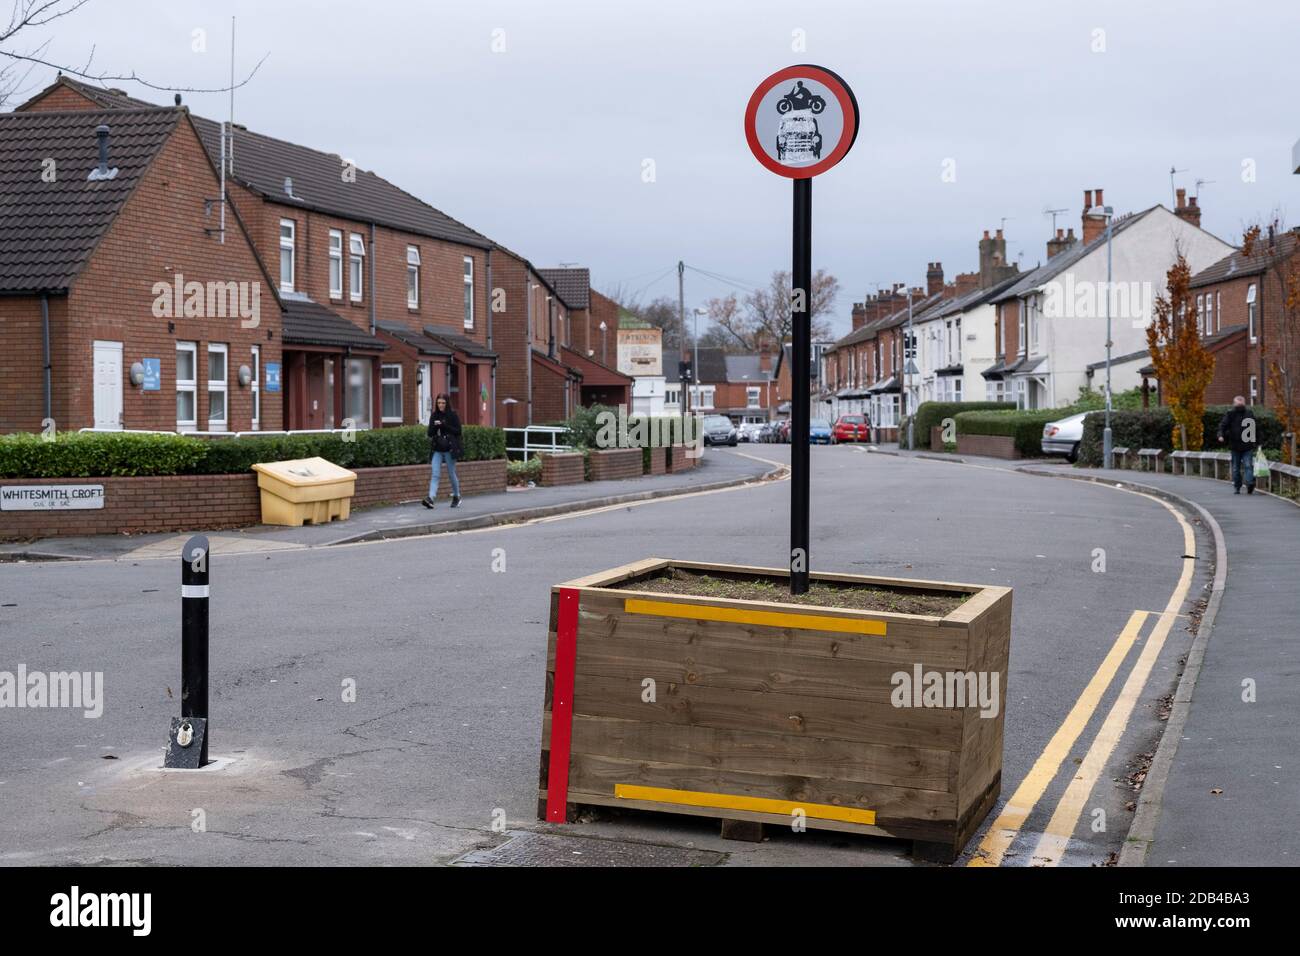 Low-traffic neighbourhood barriers put in place in Kings Heath on 16th November 2020 in Birmingham, United Kingdom. These traffic restrictions, many of which have been rushed through by local councils during the Coronavirus pandemic have created controversy in local communities, many of whom object the road closures which affect some businesses and roads adversely. The green measures, which have been named 'places for people' by Birmingham City Council are designed reduce traffic and to promote walking and cycling have been criticised for being environmentally unsound, and forcing traffic onto Stock Photo